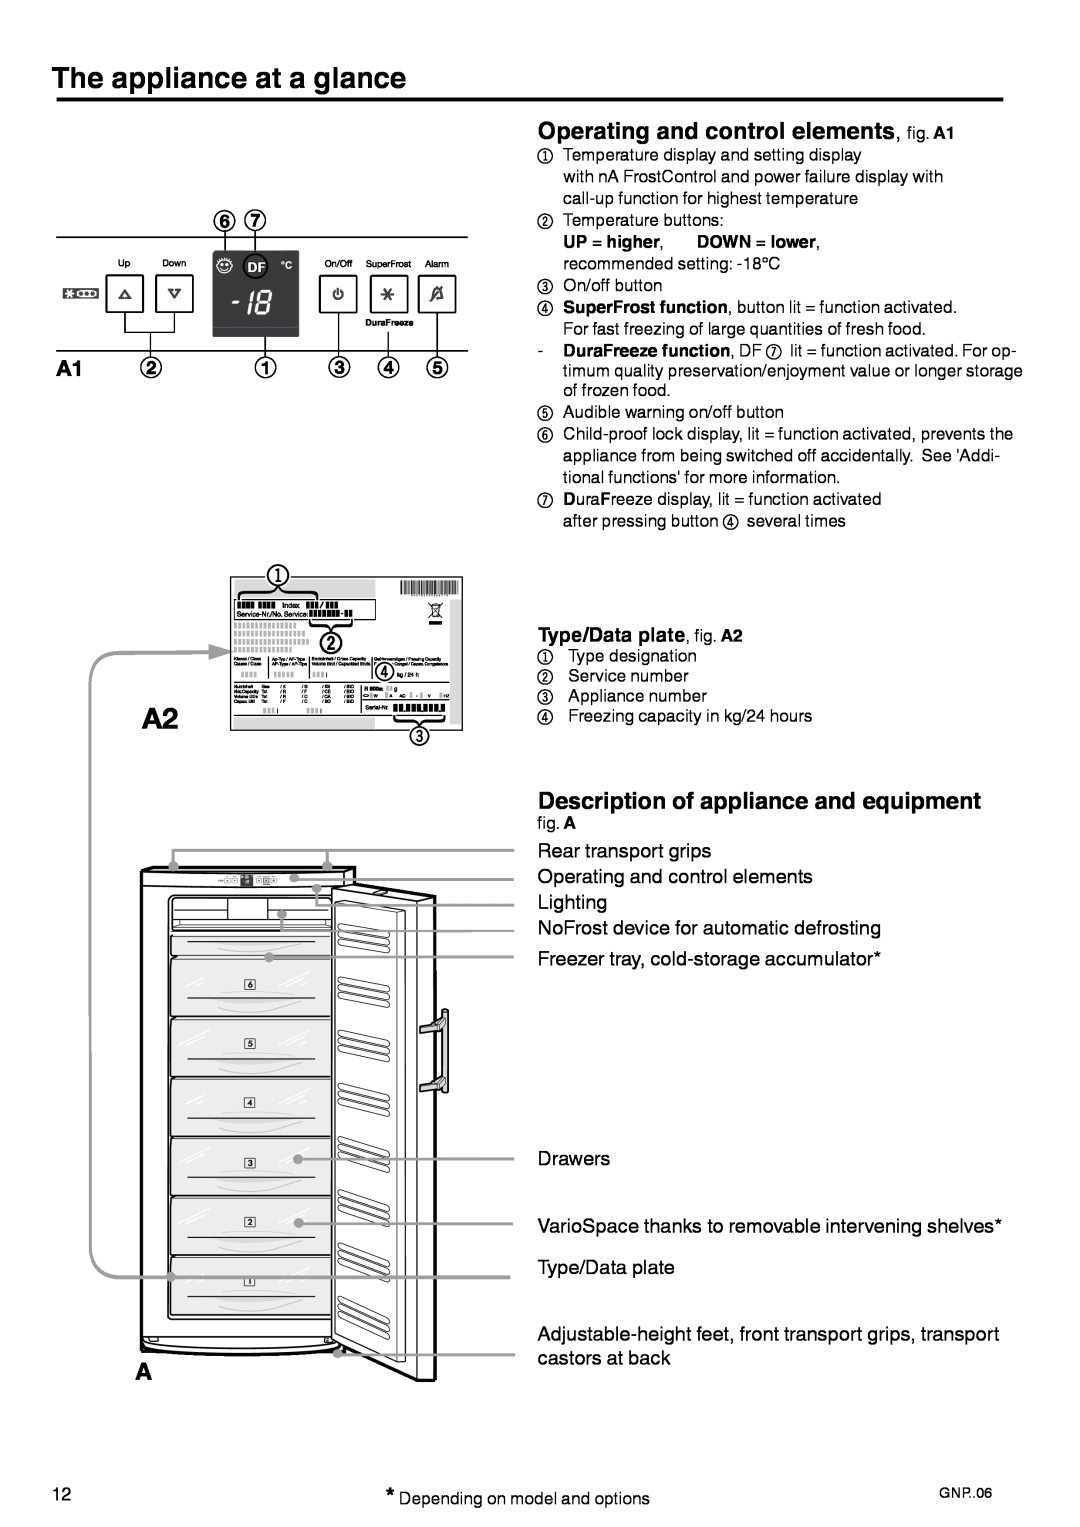 Liebherr 7084 152 - 00 manual The appliance at a glance, Operating and control elements, fig. A1 